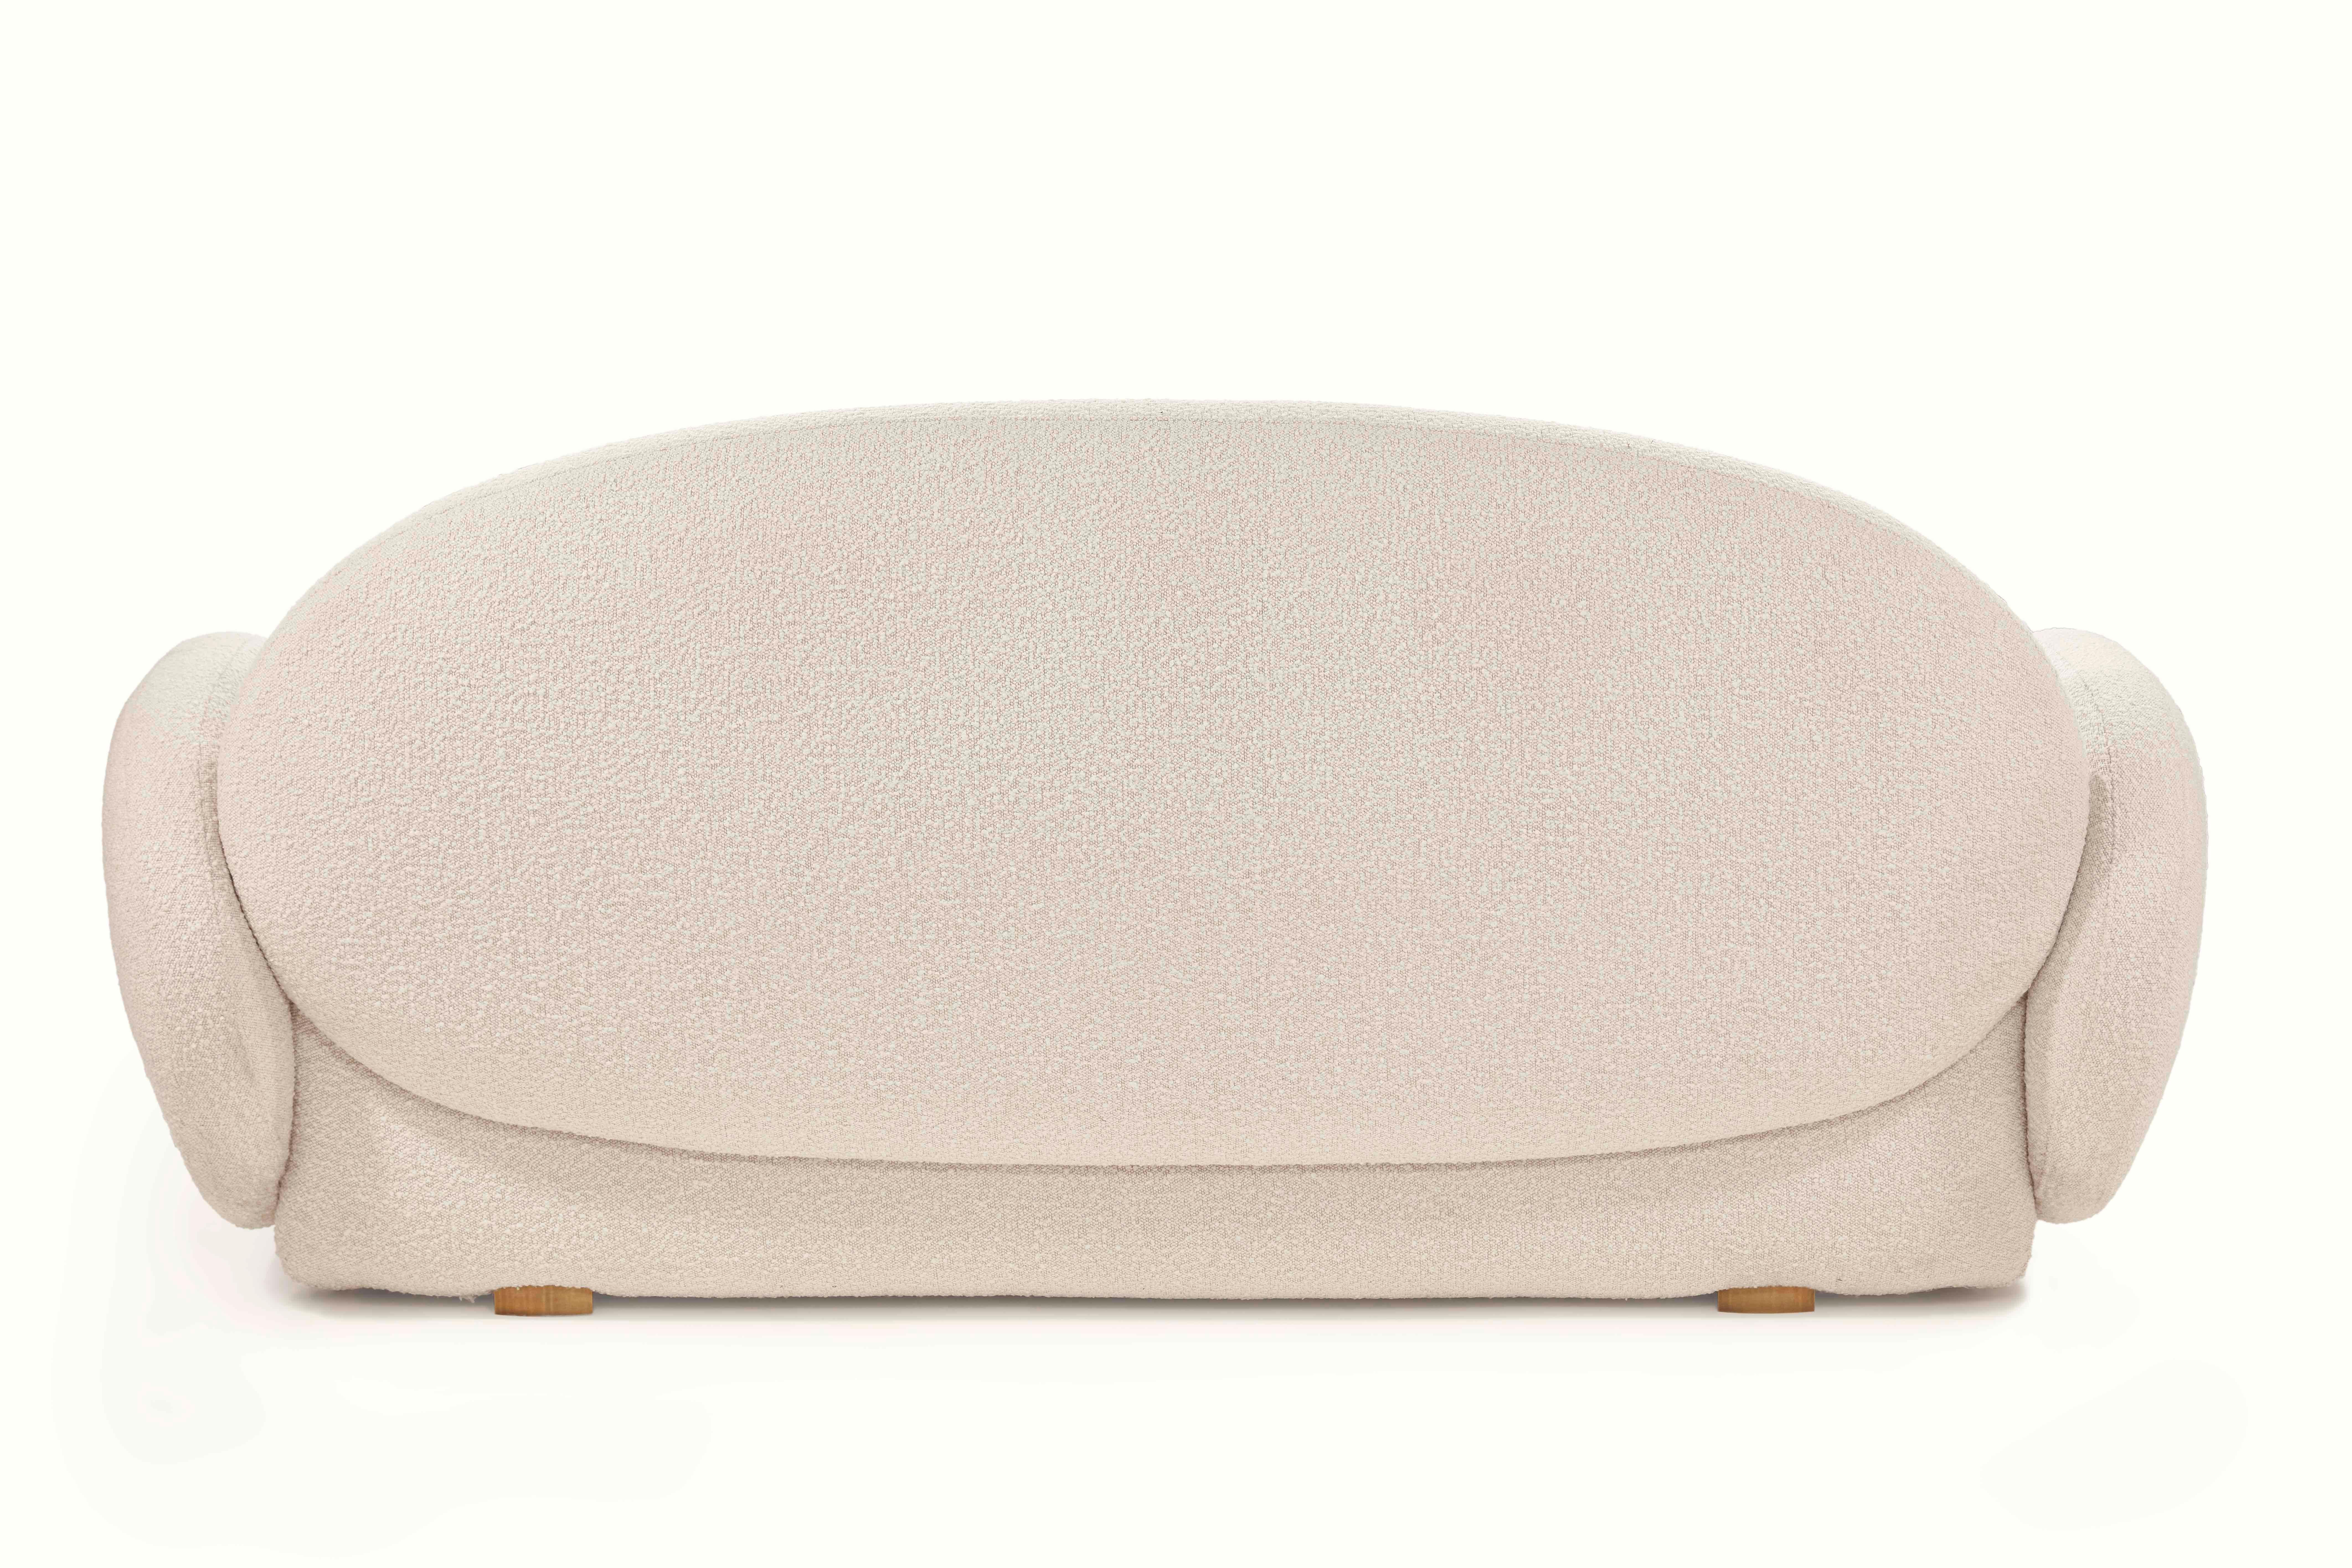 Dolce Sofa Ivory is an exquisite and ergonomically perfect three seater sofa upholstered in plush ivory boucle fabric, ideal for playful lazing! Designed by Matteo Cibic

Have you heard of Matteoverse?
It's an amazing place where you can explore,